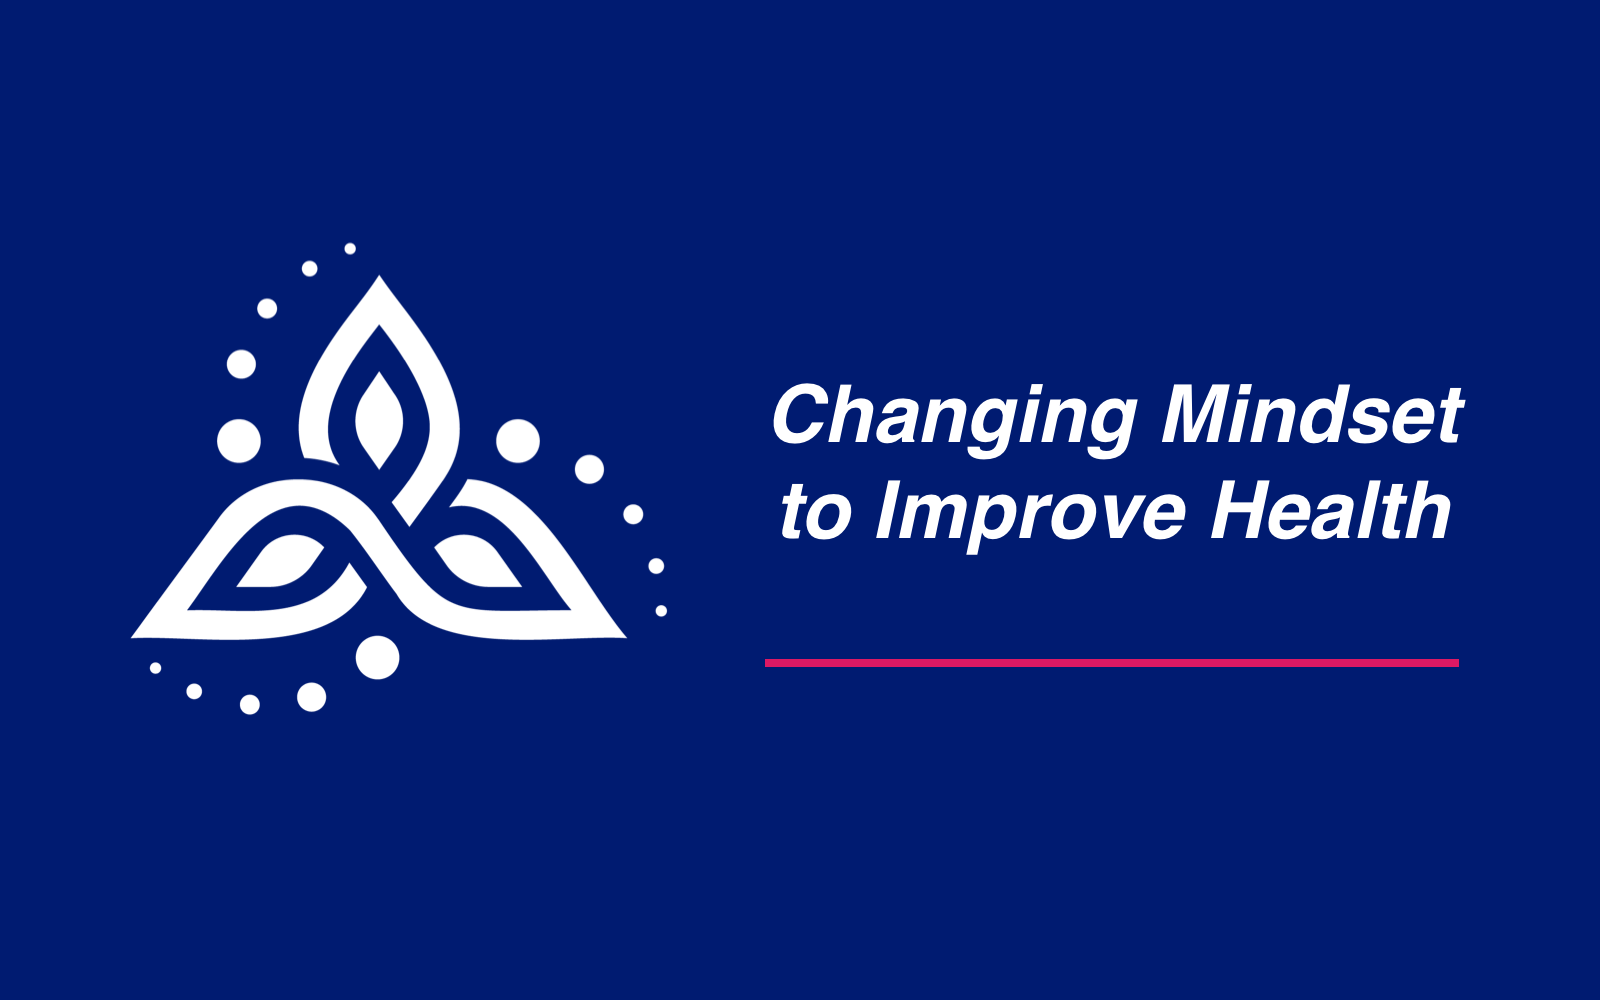 Changing Mindset to Improve Health